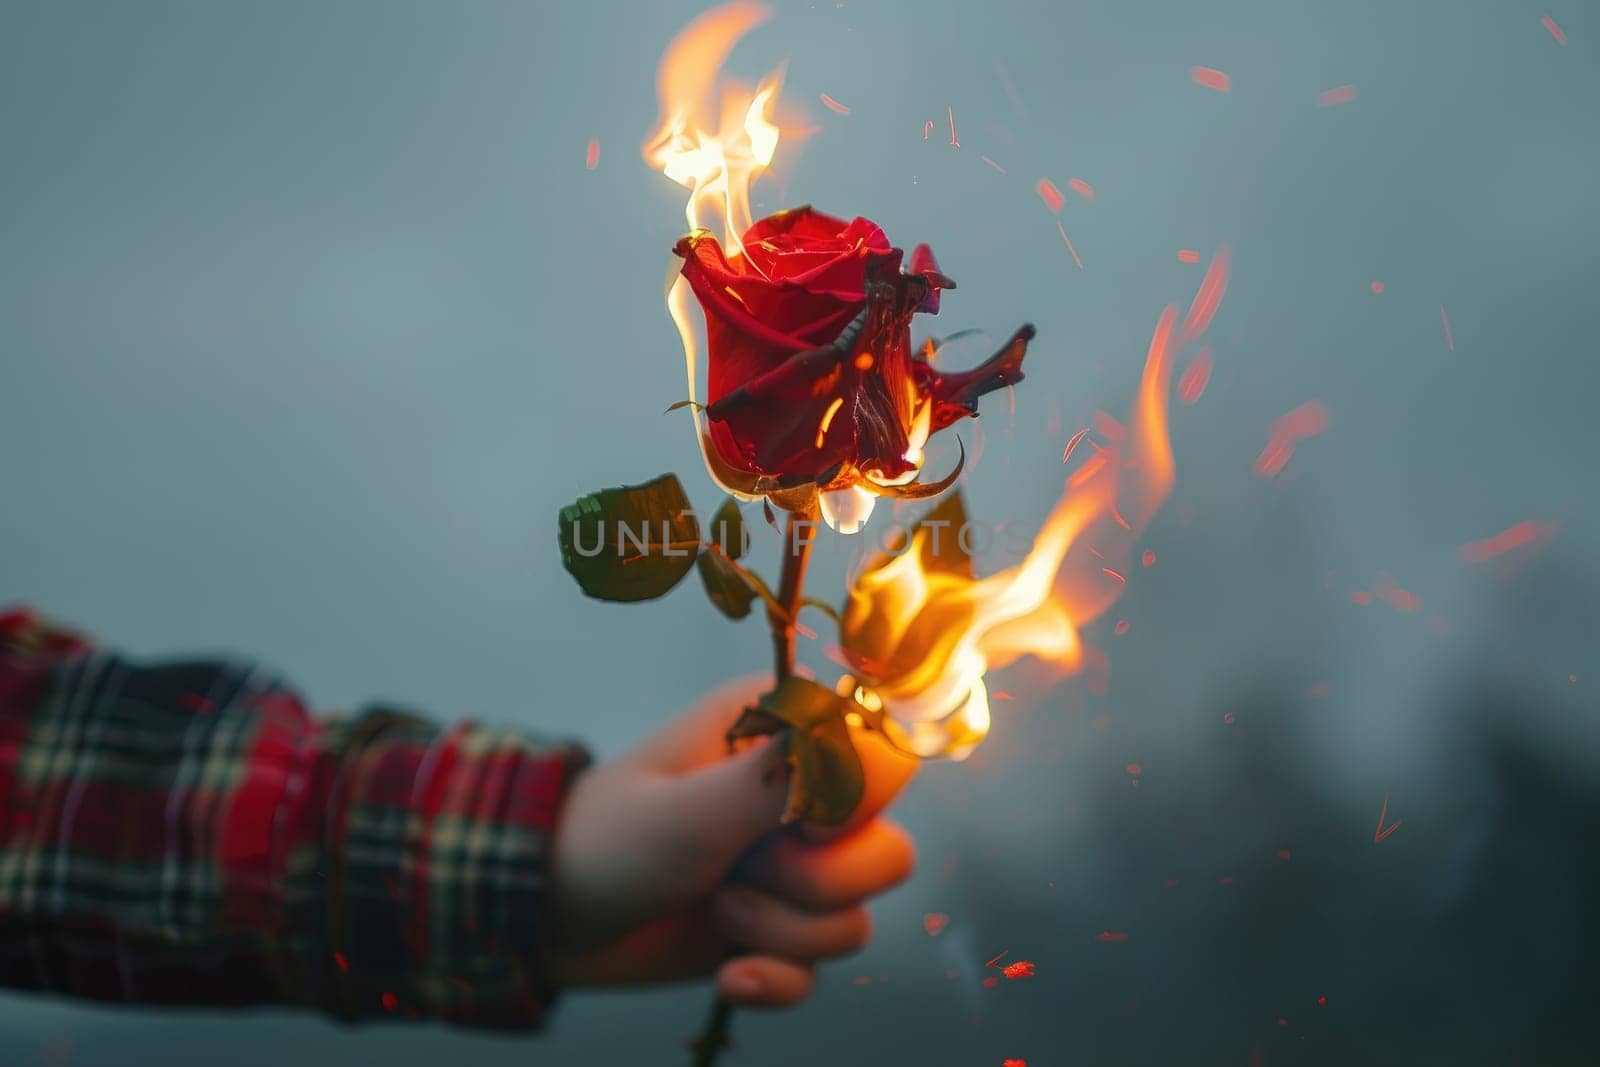 photo of Rose in from of burn on fire on left hand, minimalistic background. by Chawagen